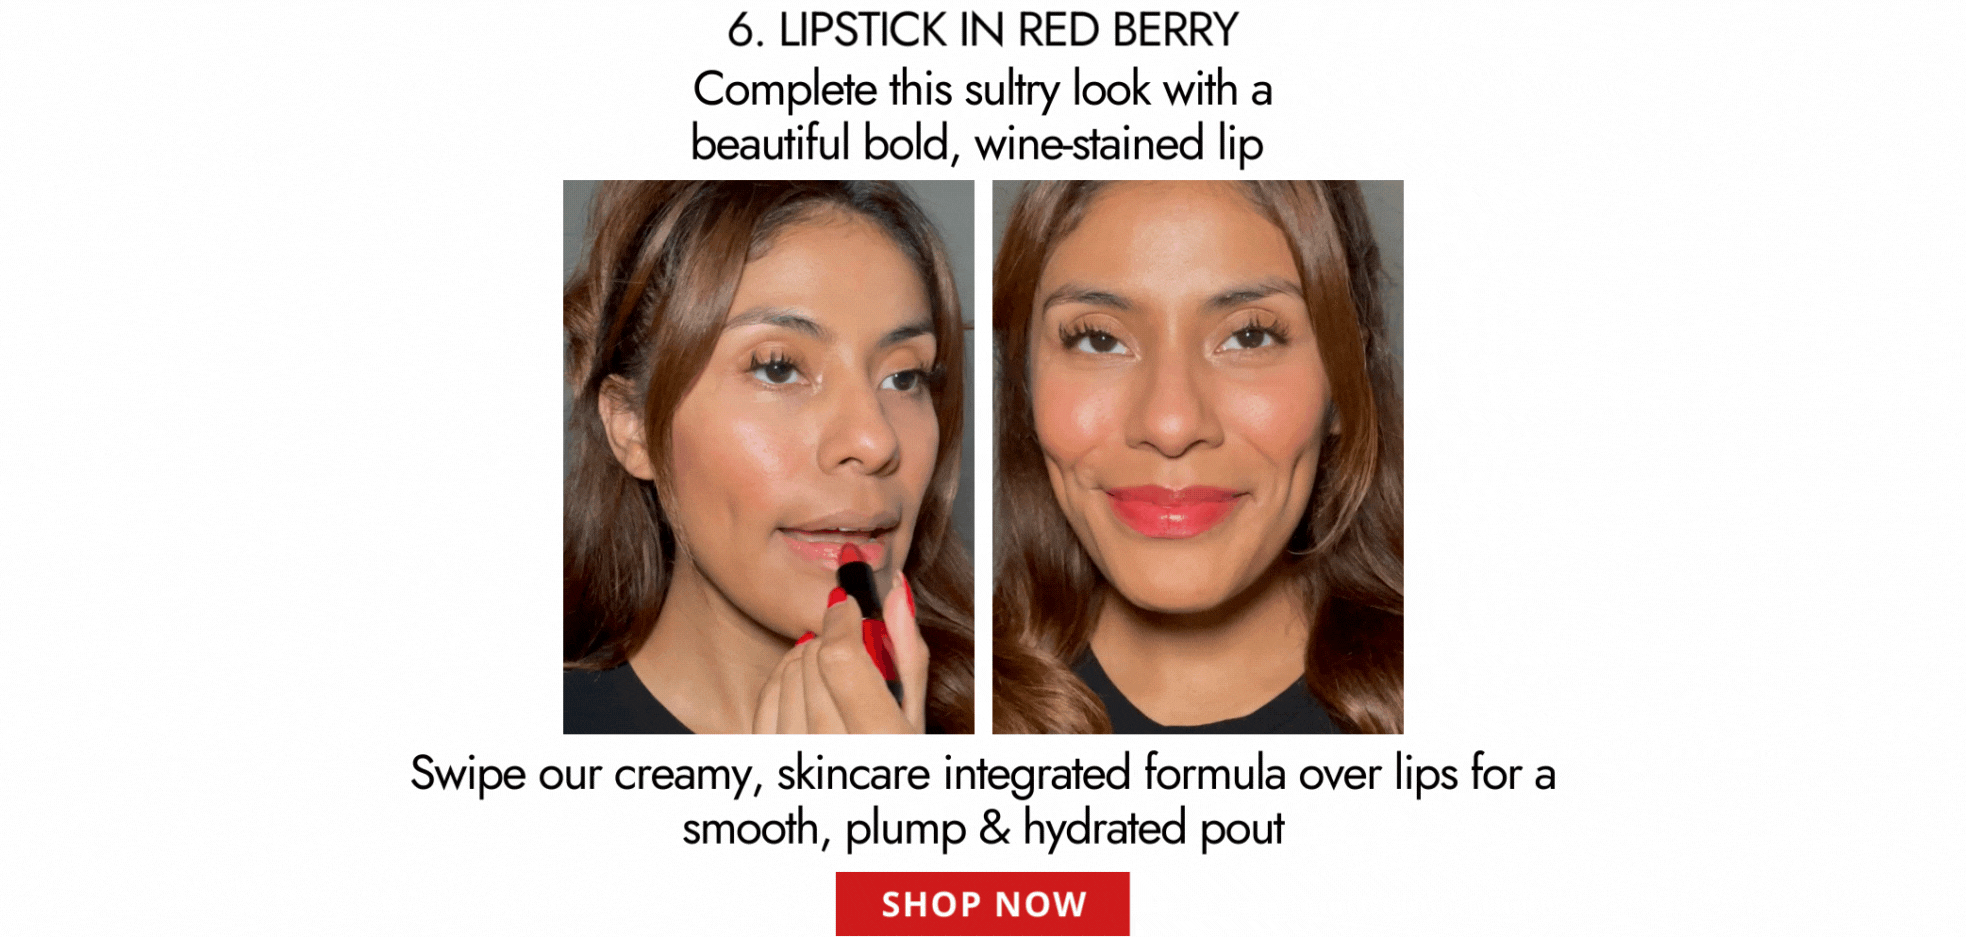 6. LIPSTICK IN RED BERRY Complete this sultry look with a beautiful bold, wine-stained lip   [VIDEO]  Swipe our creamy, skincare integrated formula over lips for a  smooth, plump & hydrated pout  SHOP NOW